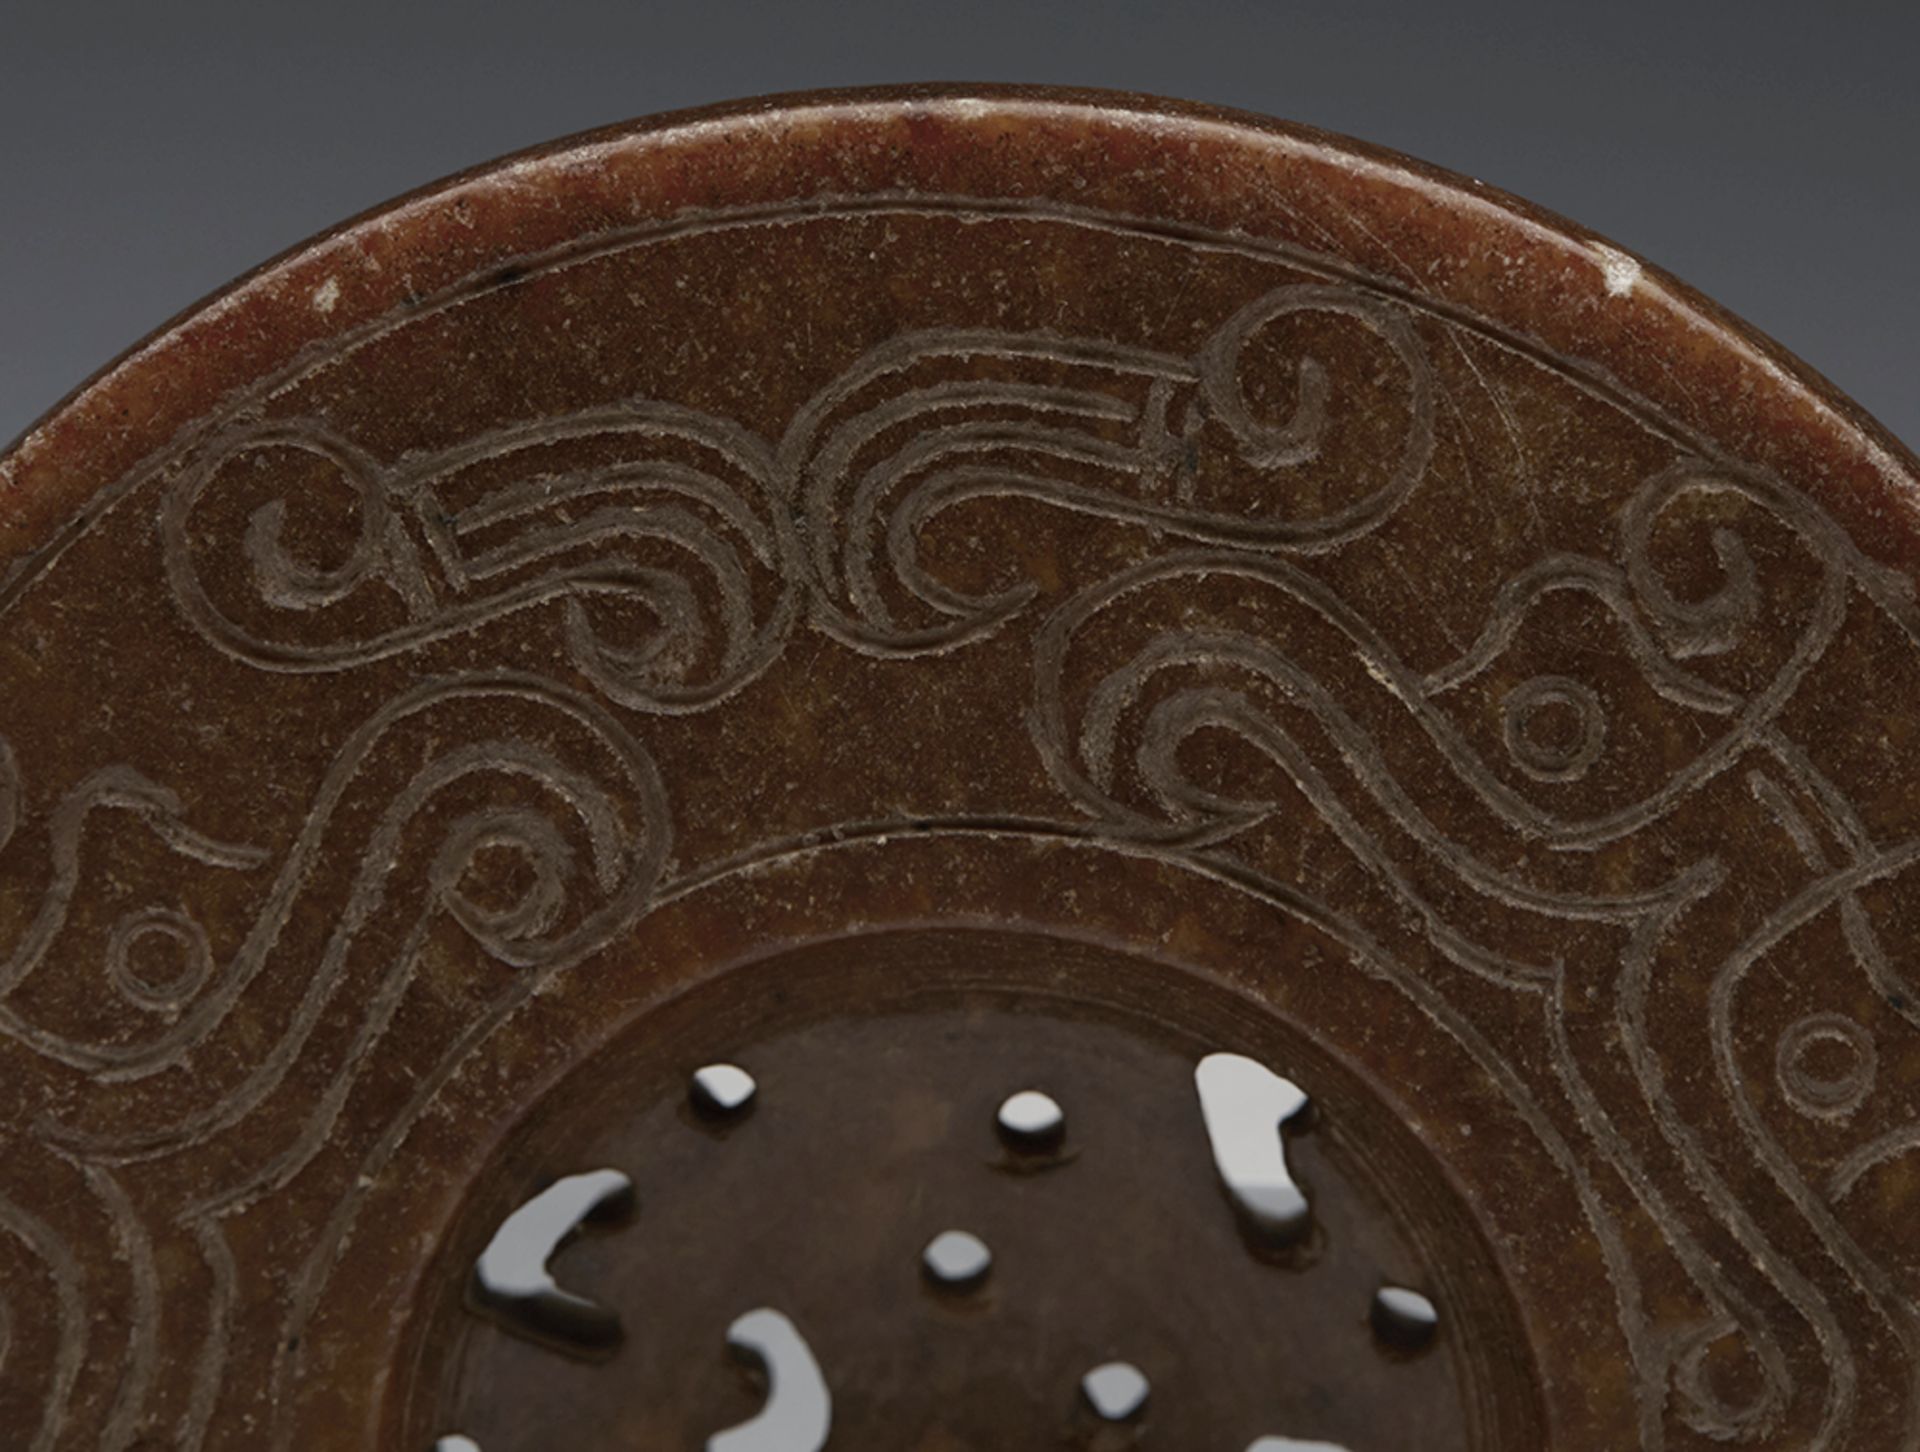 ANTIQUE CHINESE HARDSTONE DISC WITH DRAGONS C.1900 - Image 6 of 7